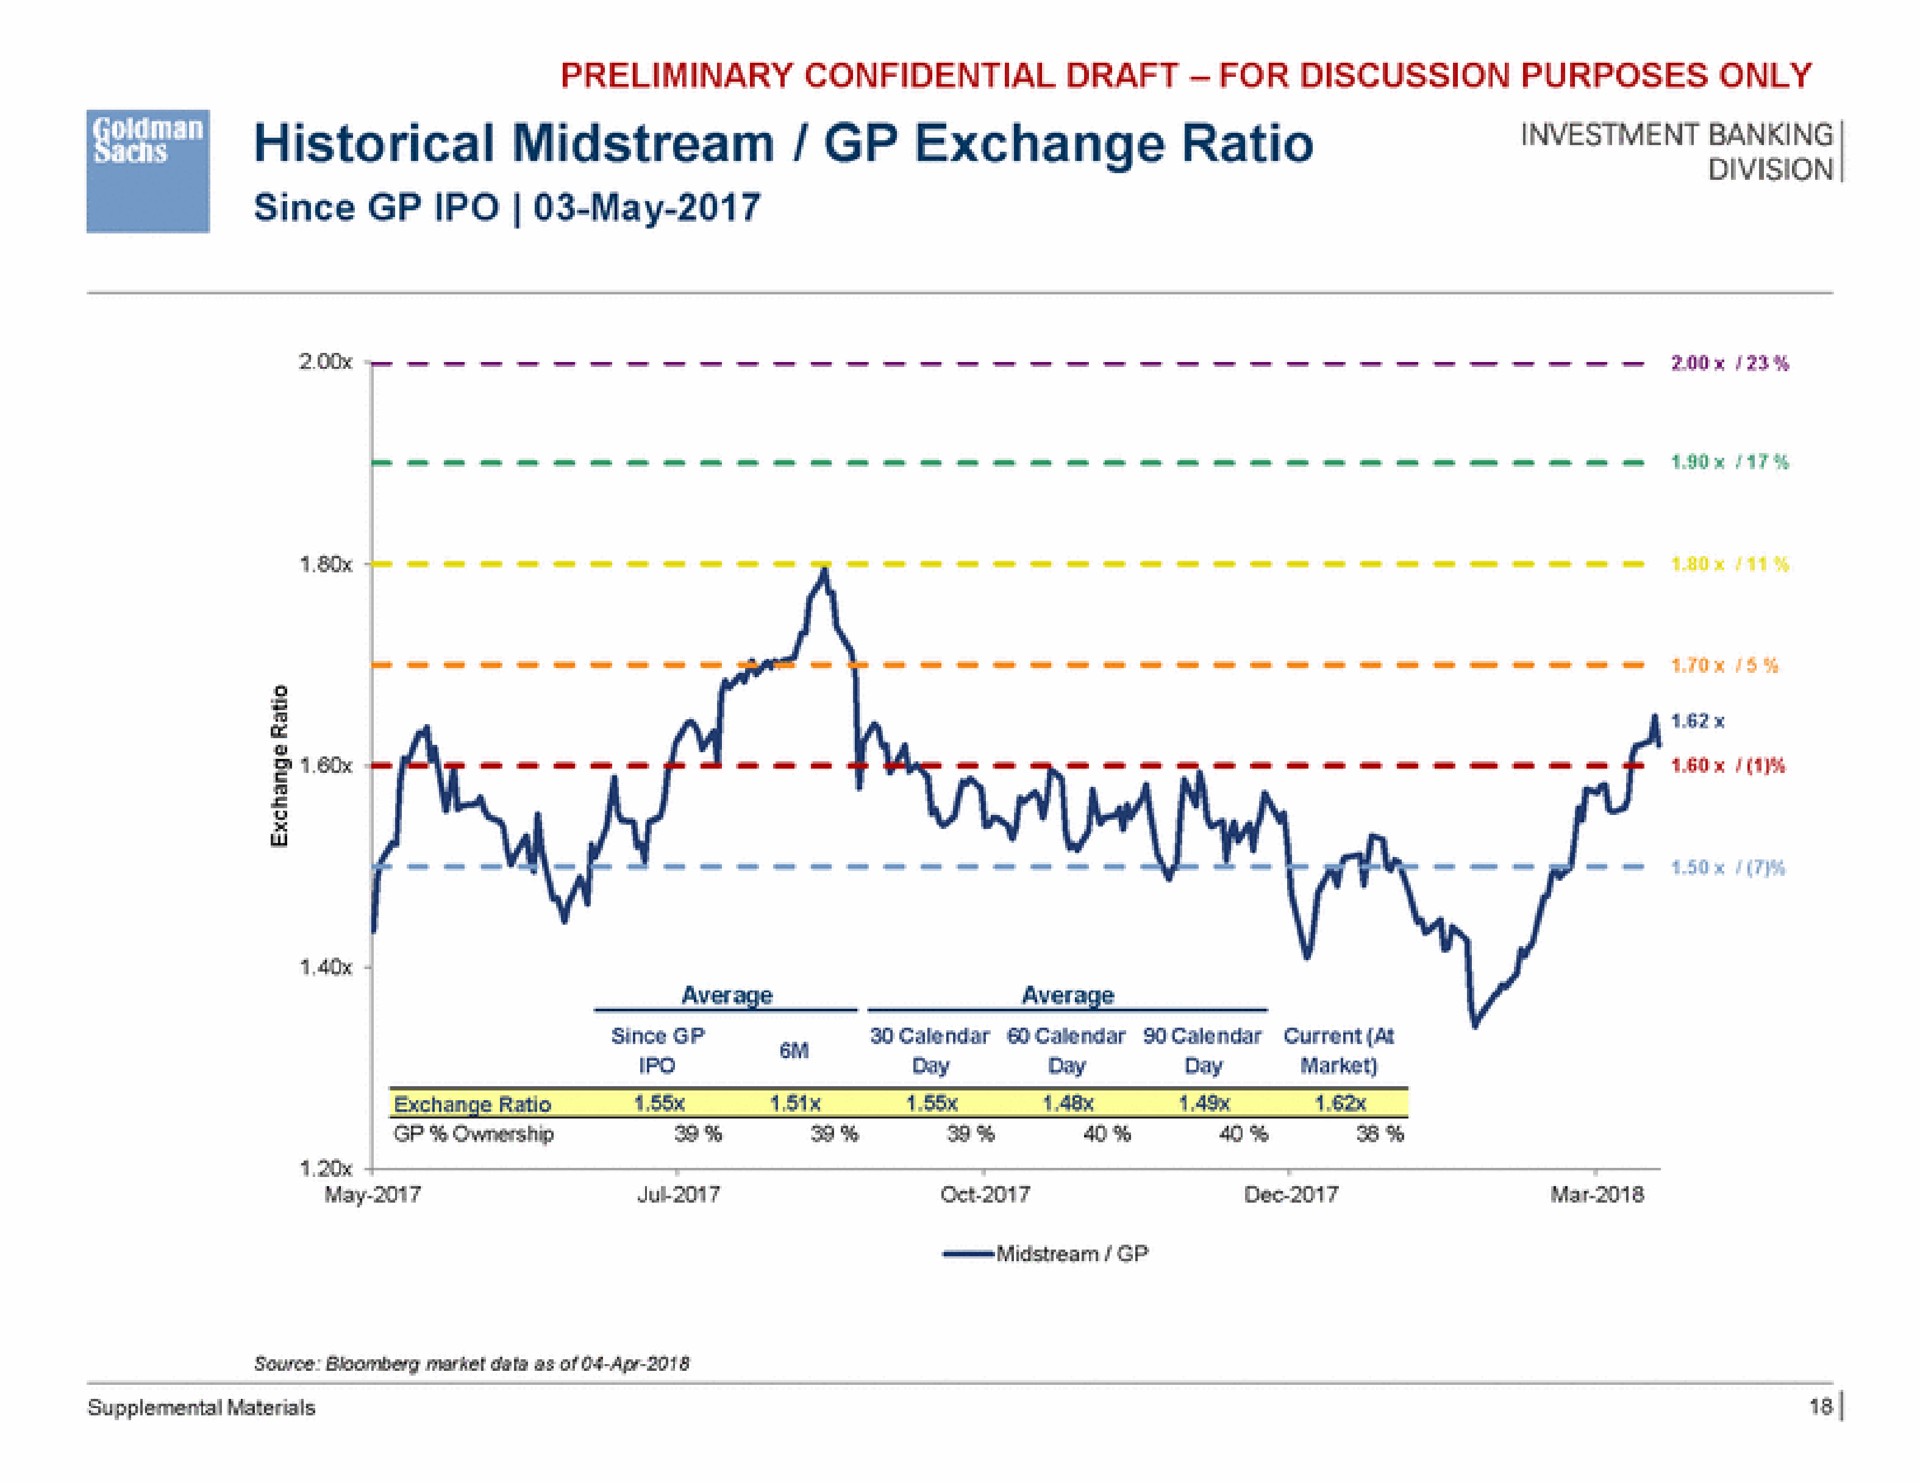 a historical midstream exchange ratio investment banking | Goldman Sachs